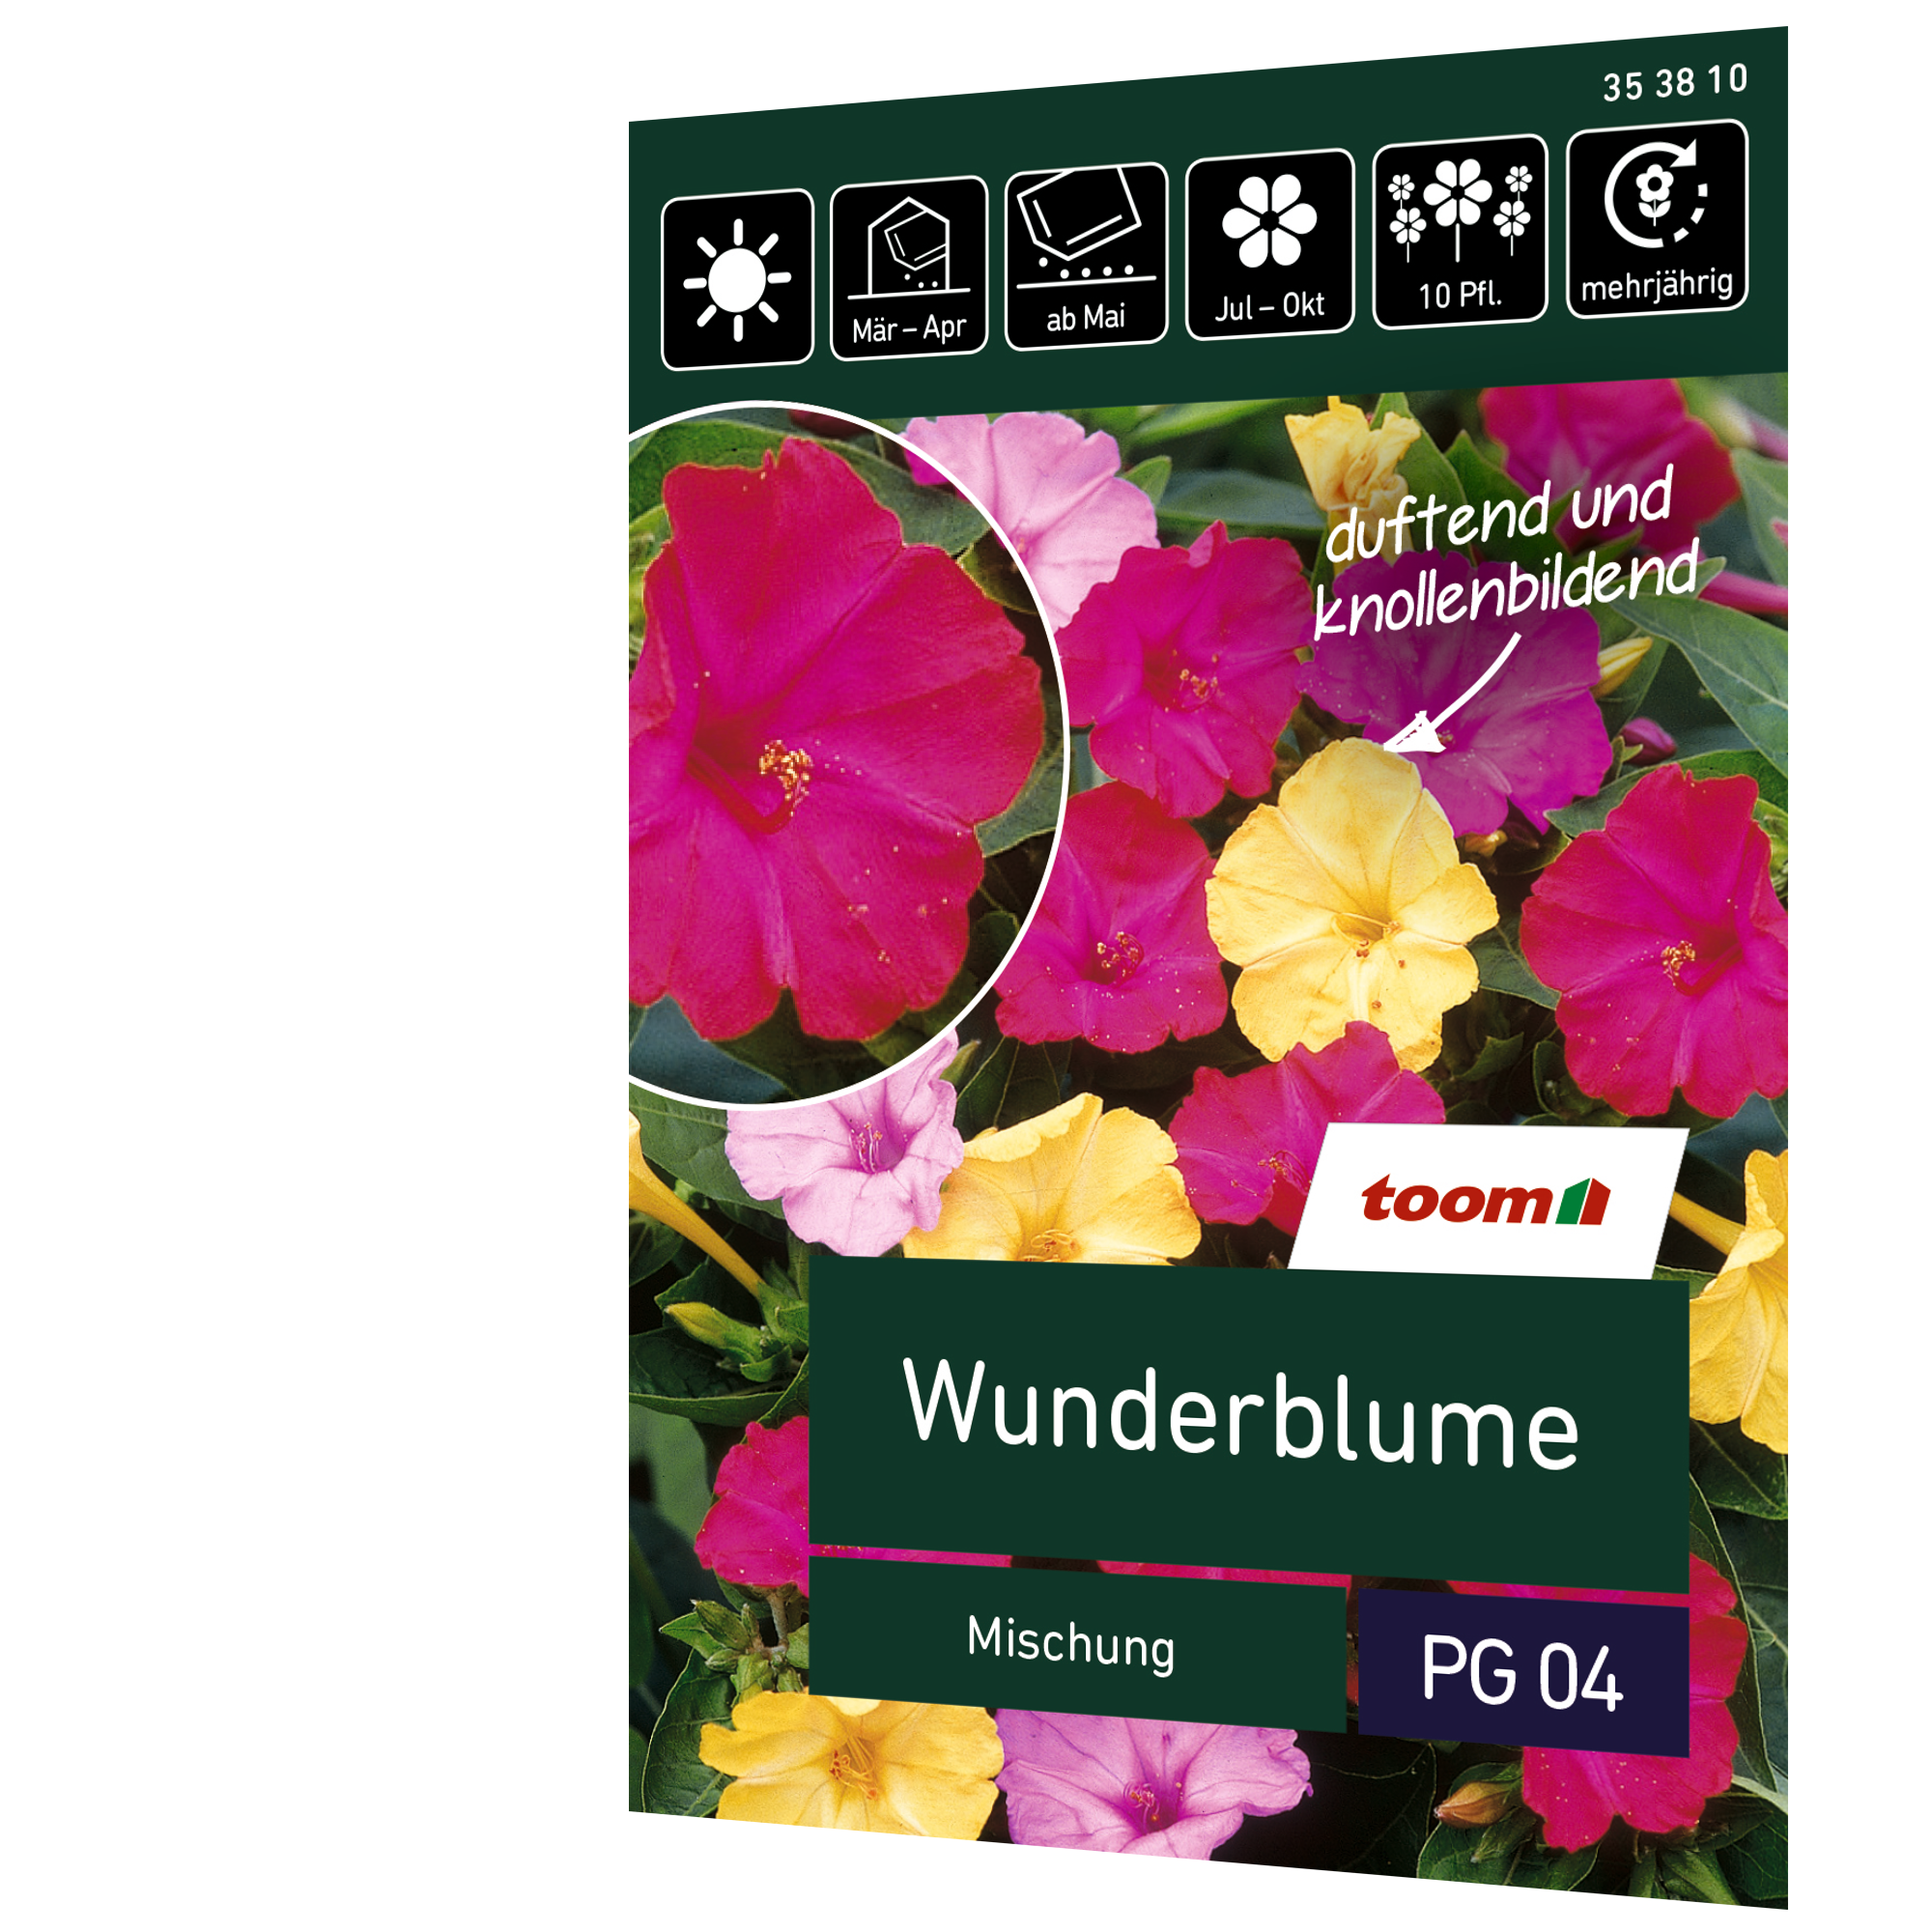 Wunderblume 'Mischung' + product picture